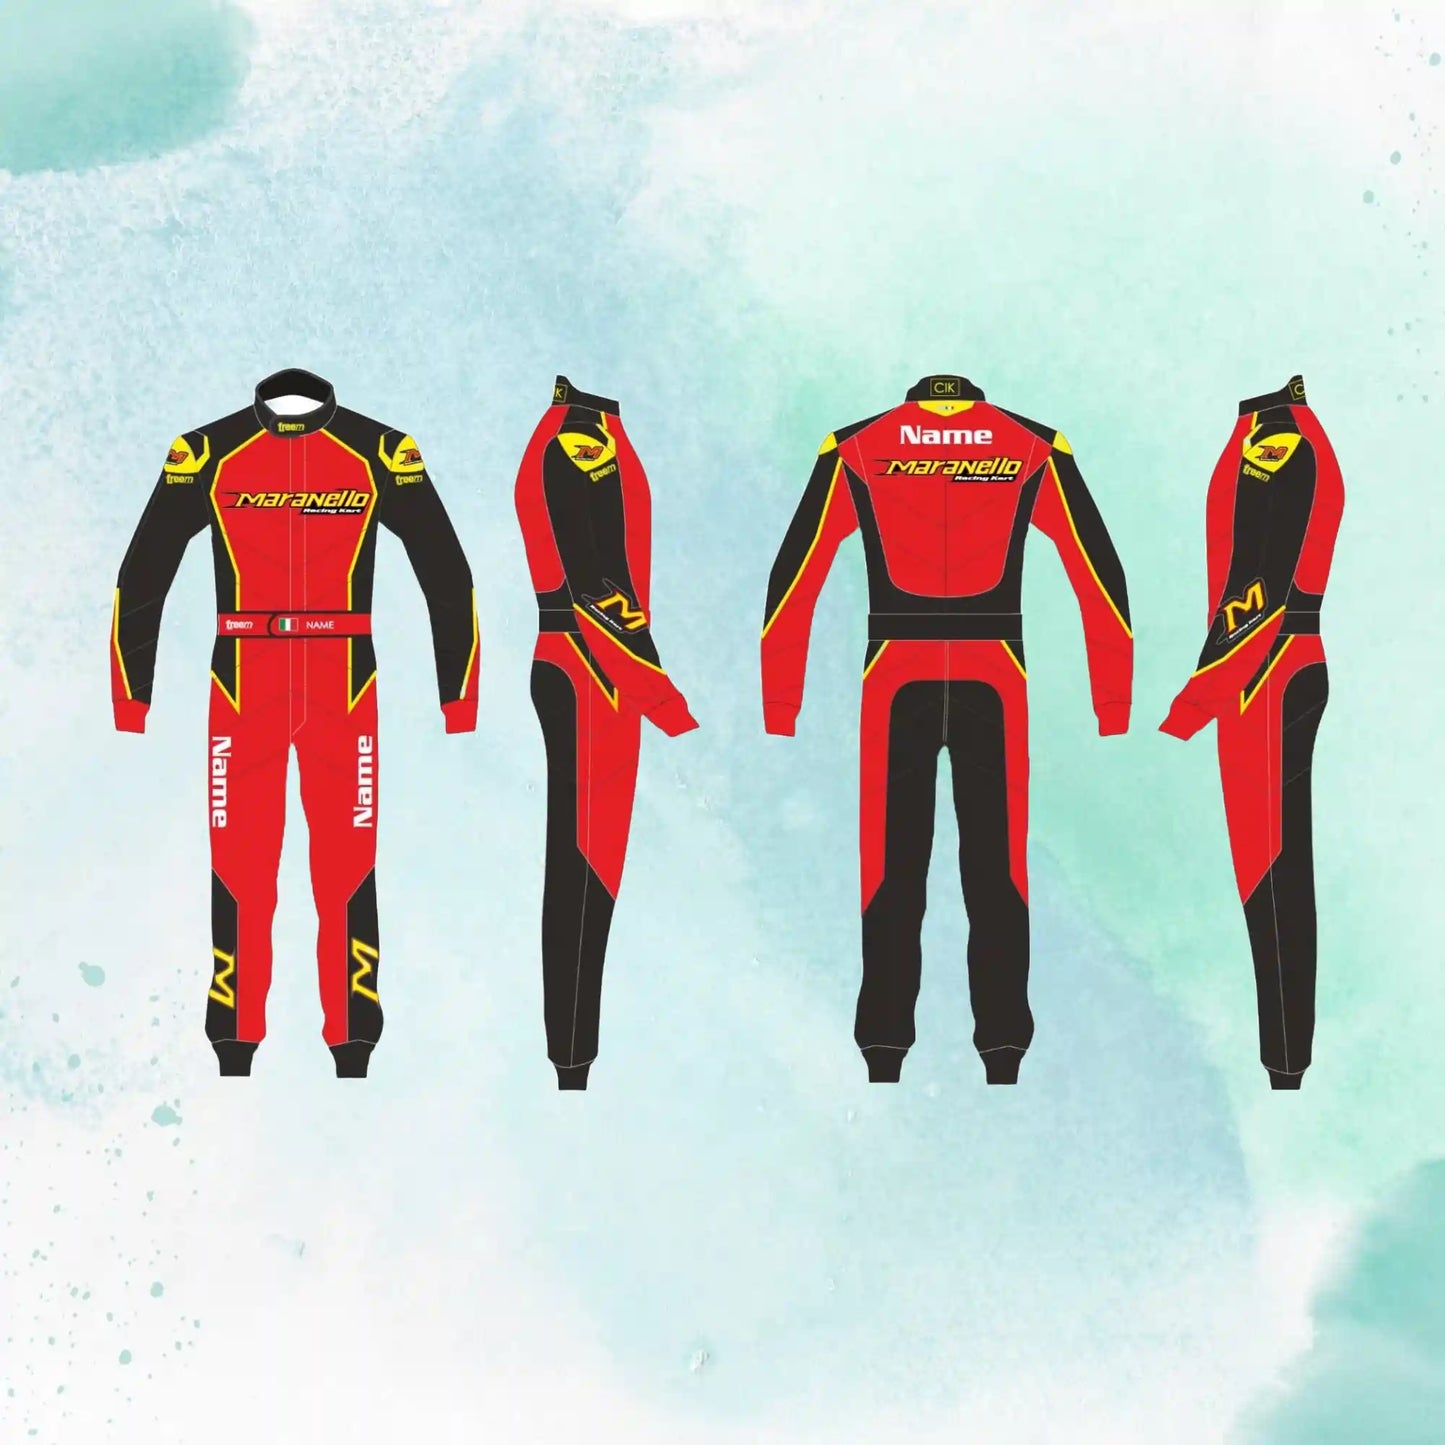 Maranello 2020 Overall Go Kart Racing Sublimation Printed Suit